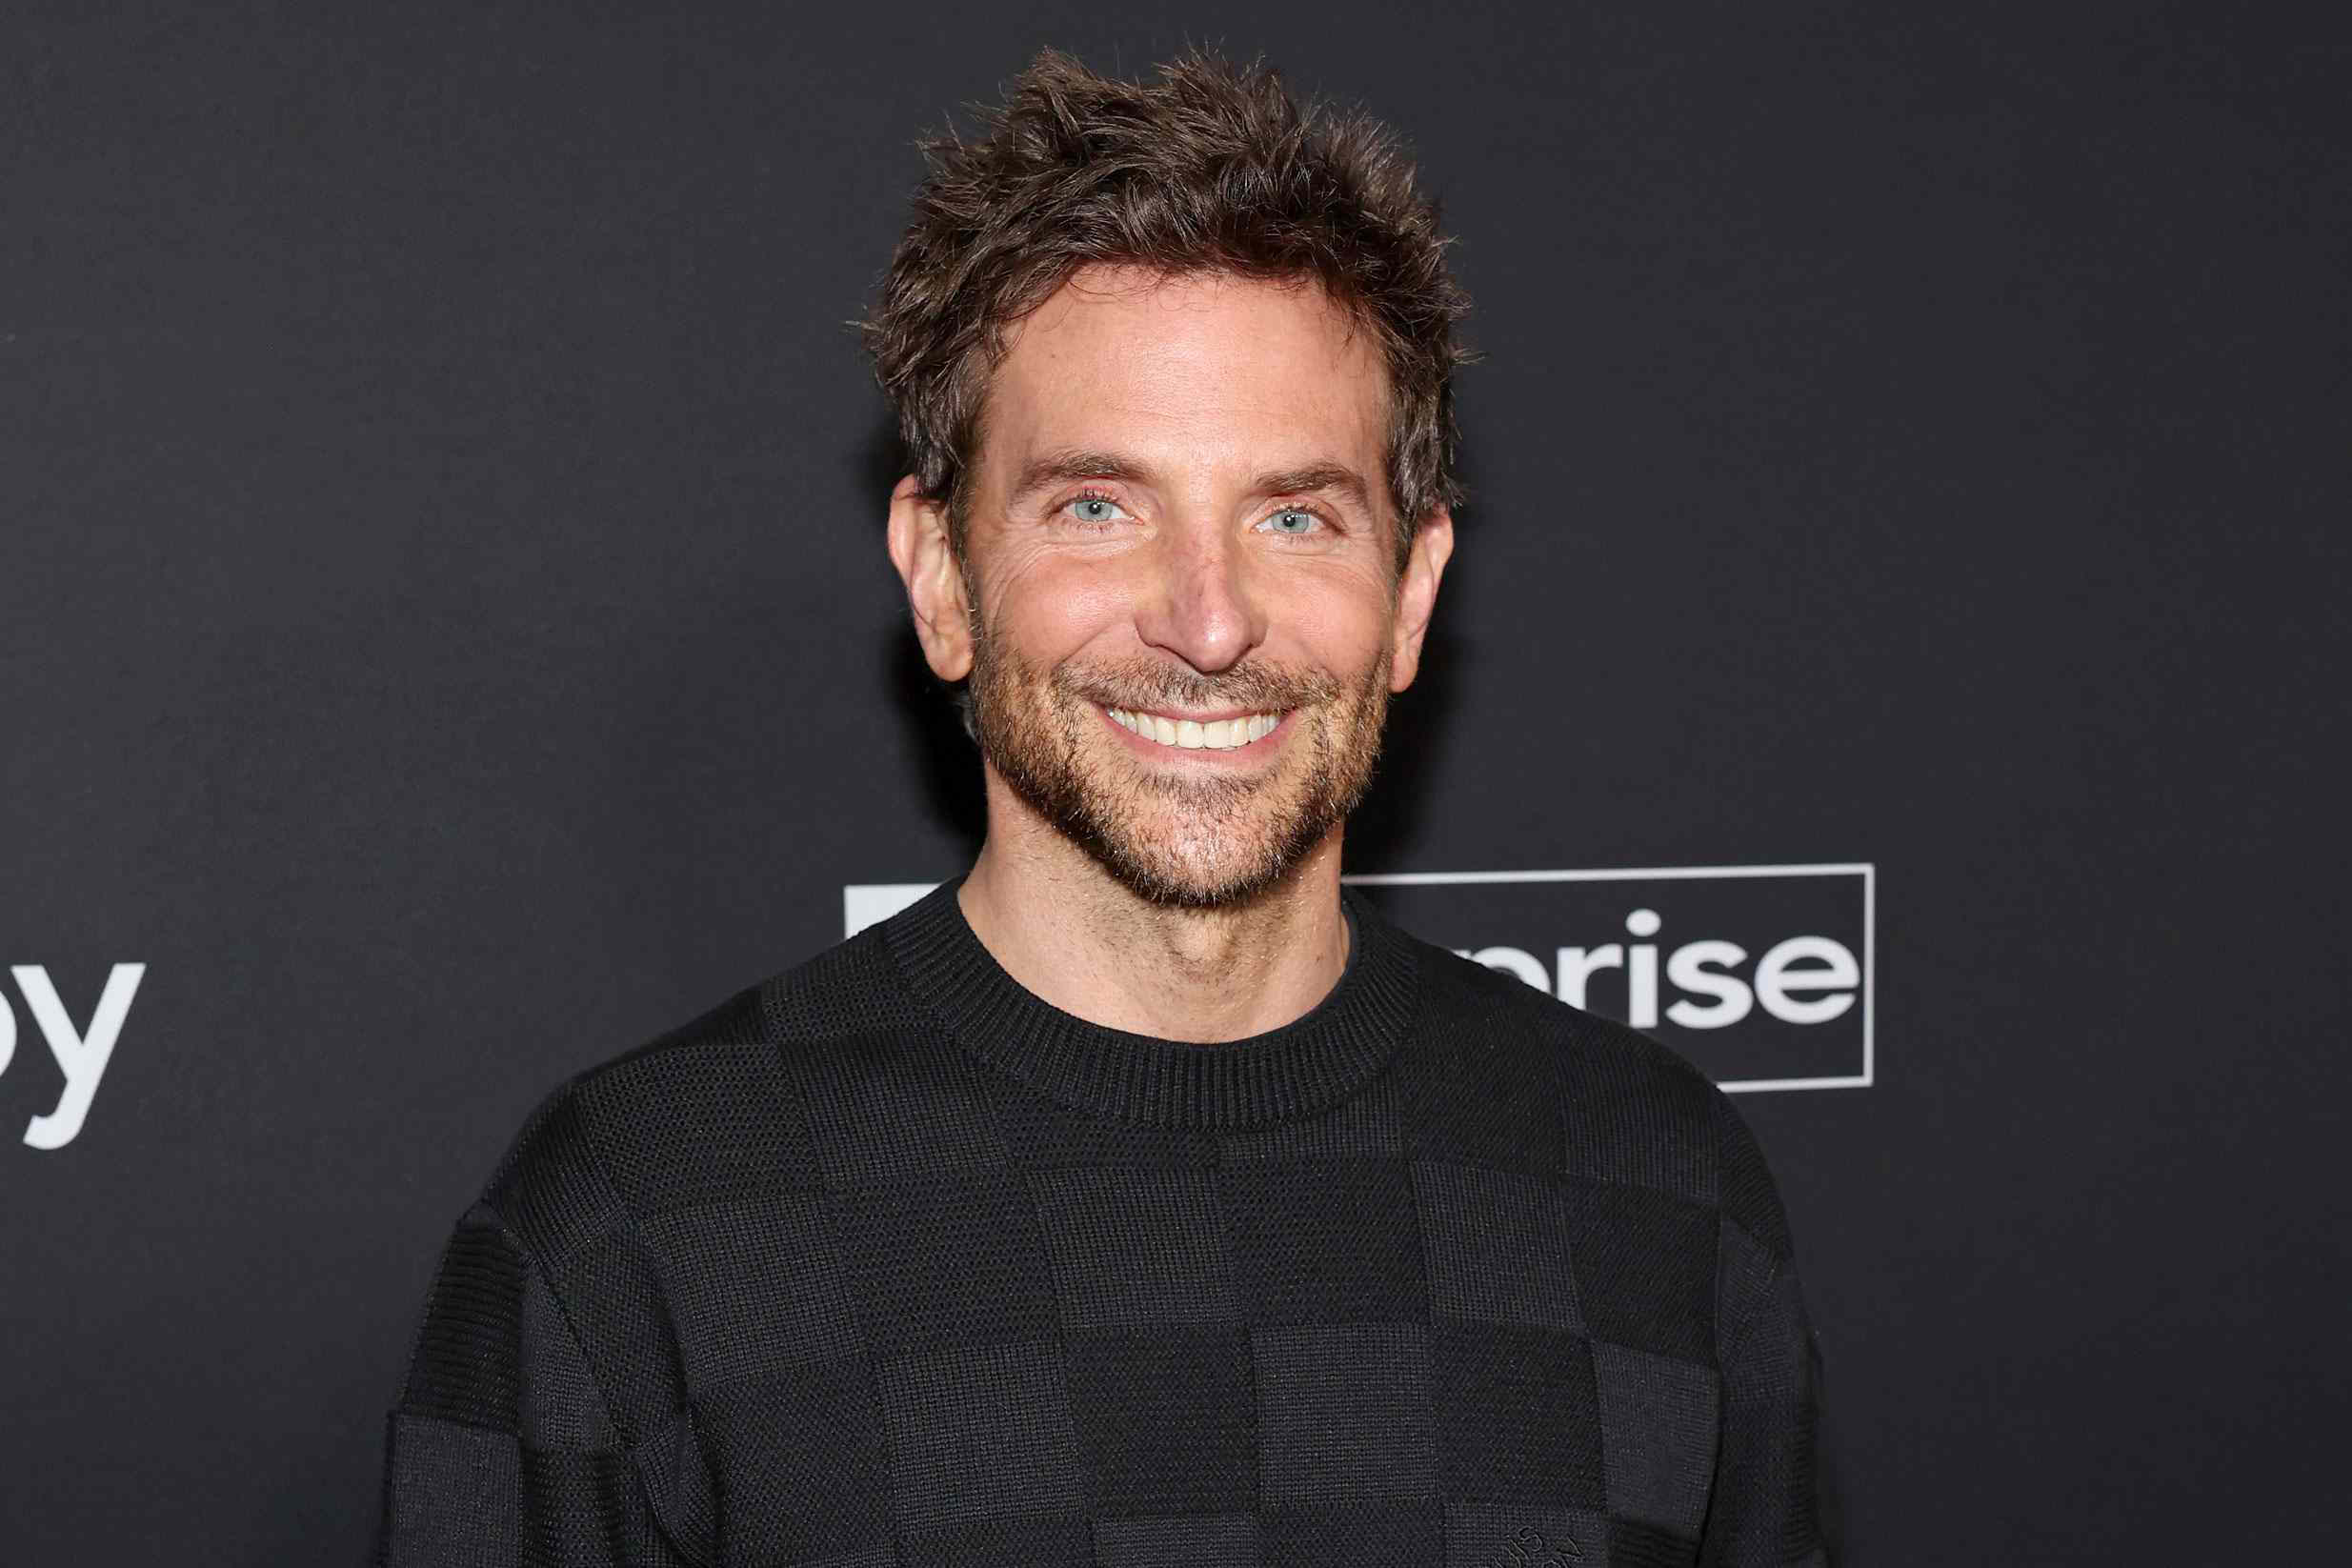 Bradley Cooper Jokes He'd Rather Have an Eagles Super Bowl Win in 2024